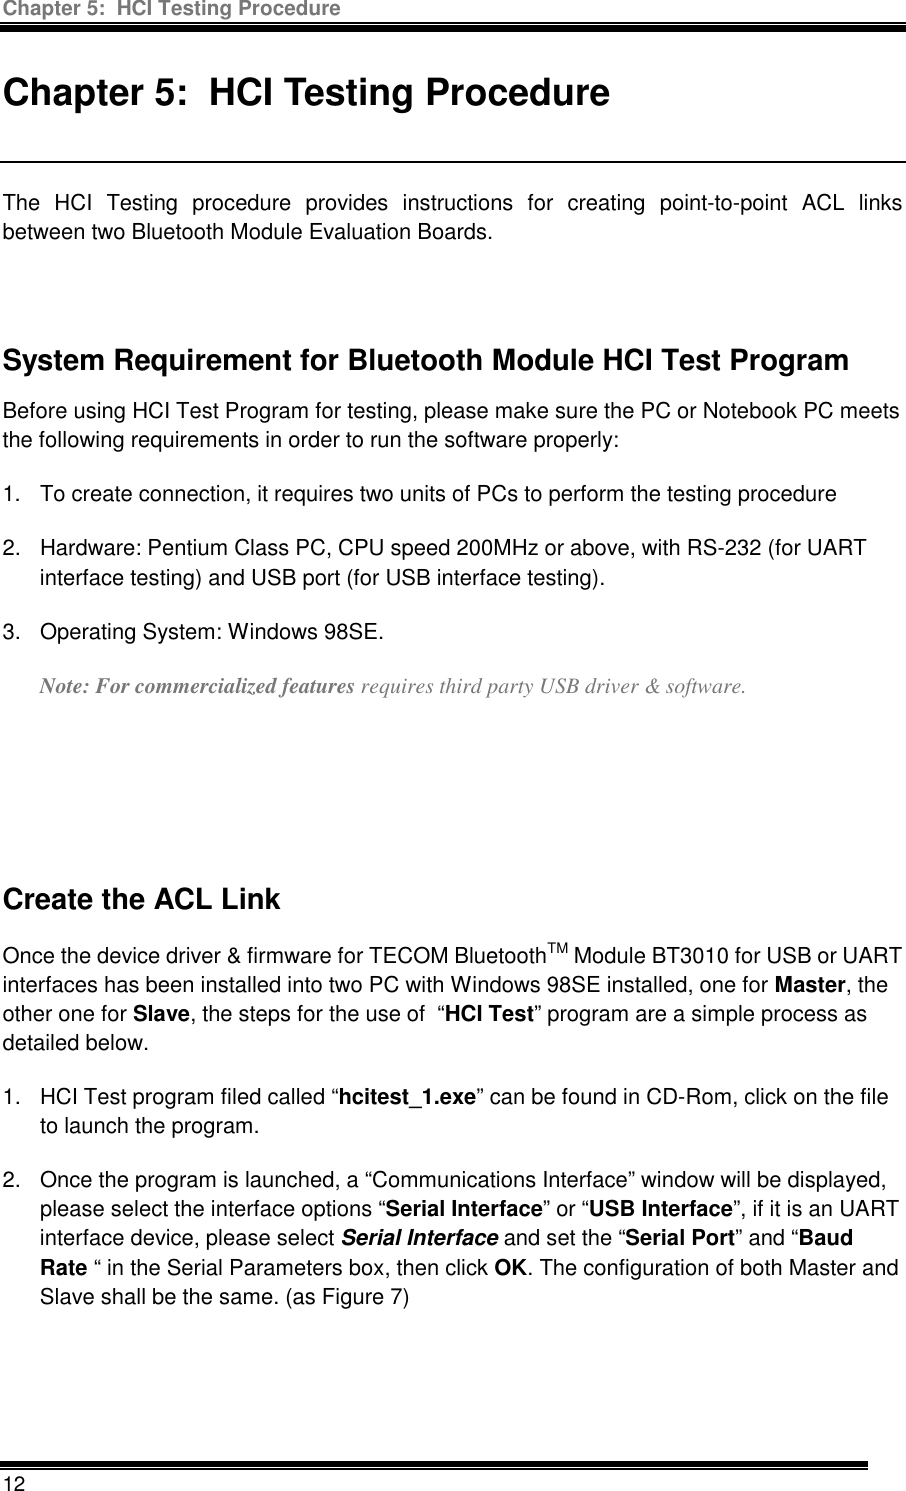 Chapter 5:  HCI Testing Procedure  12  Chapter 5:  HCI Testing Procedure  The HCI Testing procedure provides instructions for creating point-to-point ACL links between two Bluetooth Module Evaluation Boards.   System Requirement for Bluetooth Module HCI Test Program  Before using HCI Test Program for testing, please make sure the PC or Notebook PC meets the following requirements in order to run the software properly: 1.  To create connection, it requires two units of PCs to perform the testing procedure 2.  Hardware: Pentium Class PC, CPU speed 200MHz or above, with RS-232 (for UART interface testing) and USB port (for USB interface testing). 3.  Operating System: Windows 98SE. Note: For commercialized features requires third party USB driver &amp; software.     Create the ACL Link Once the device driver &amp; firmware for TECOM BluetoothTM Module BT3010 for USB or UART interfaces has been installed into two PC with Windows 98SE installed, one for Master, the other one for Slave, the steps for the use of  “HCI Test” program are a simple process as detailed below. 1.  HCI Test program filed called “hcitest_1.exe” can be found in CD-Rom, click on the file to launch the program.  2.  Once the program is launched, a “Communications Interface” window will be displayed, please select the interface options “Serial Interface” or “USB Interface”, if it is an UART interface device, please select Serial Interface and set the “Serial Port” and “Baud Rate “ in the Serial Parameters box, then click OK. The configuration of both Master and Slave shall be the same. (as Figure 7)   